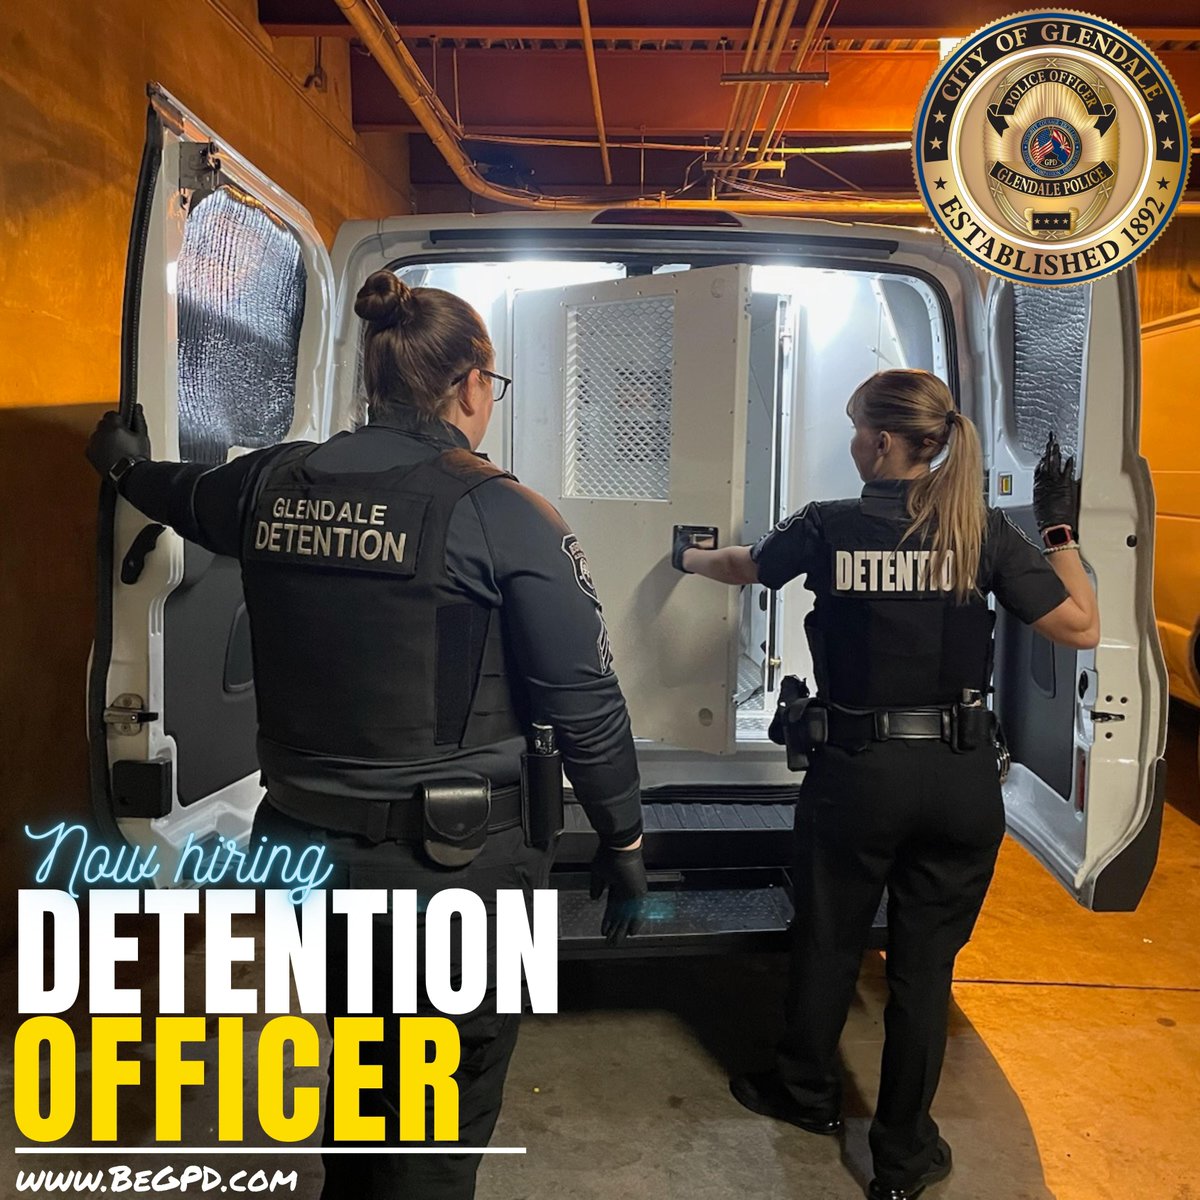 🚨 LAST CHANCE ALERT 🚨
NOW HIRING: DETENTION OFFICER
SALARY: $44,850 - $67,275 ANNUALLY
APPLICATIONS ACCEPTED UNTIL: TONIGHT 11:59PM

Don't miss this 👇

👉 bit.ly/BeGPDDetention…

#BeGPD #DetentionOfficer #corrections #policejobs #lawenforcementjobs #correctionsofficer